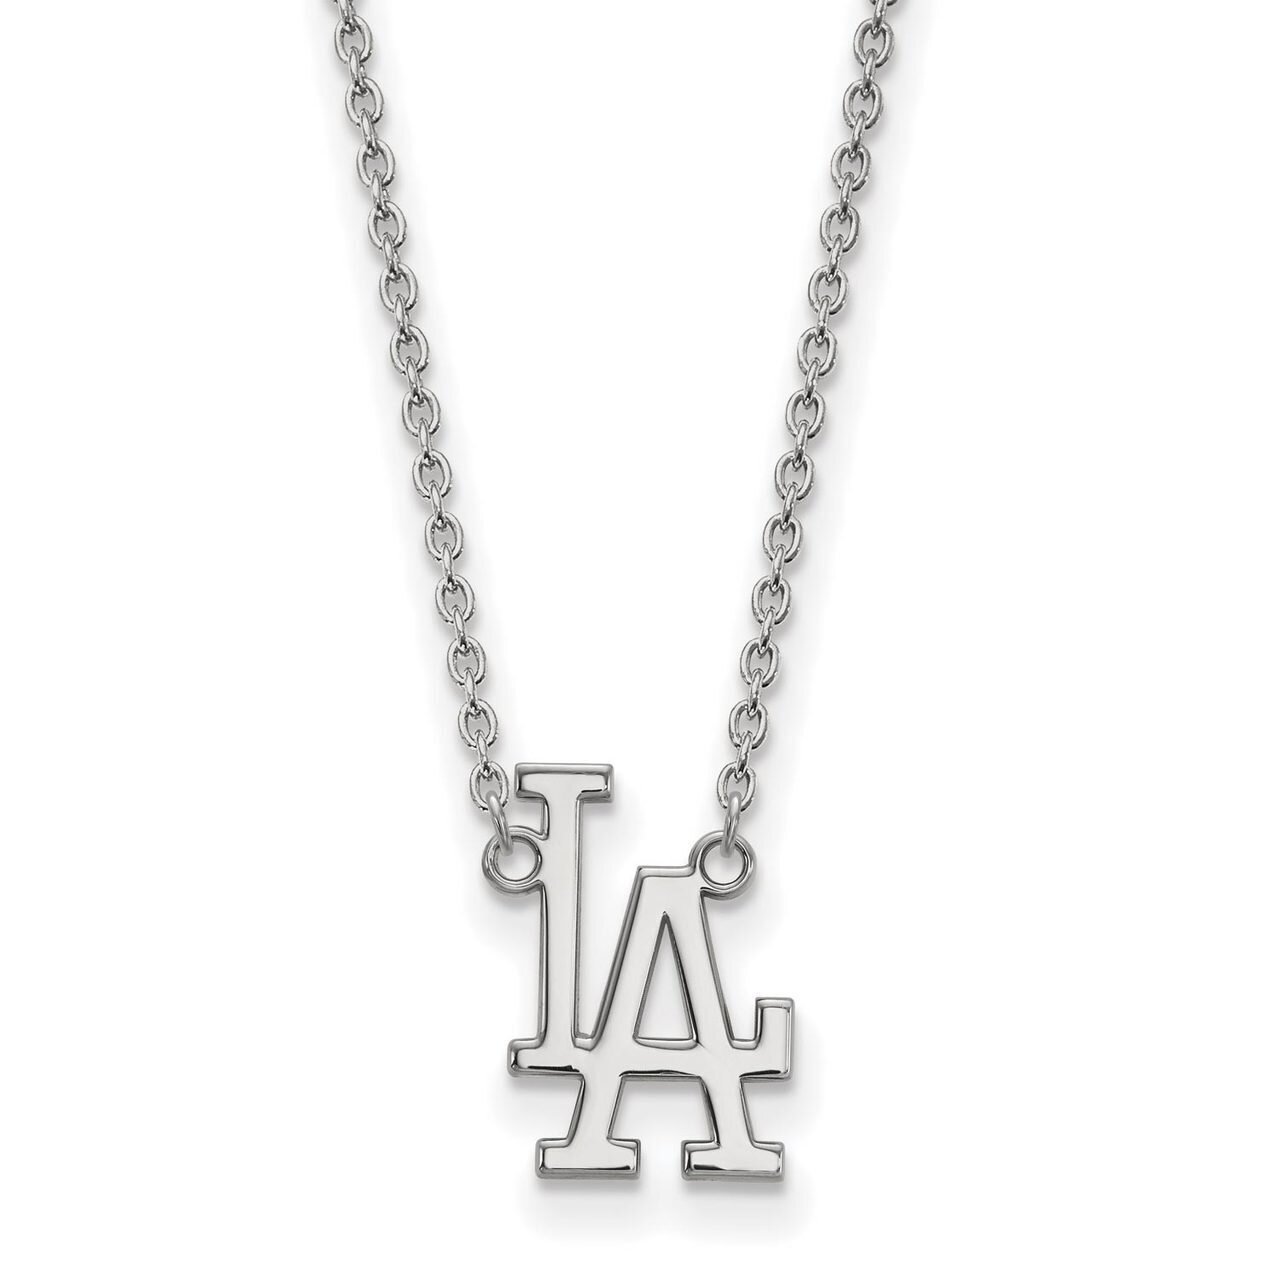 Los Angeles Dodgers Large Pendant with Chain Necklace 14k White Gold 4W009DOD-18